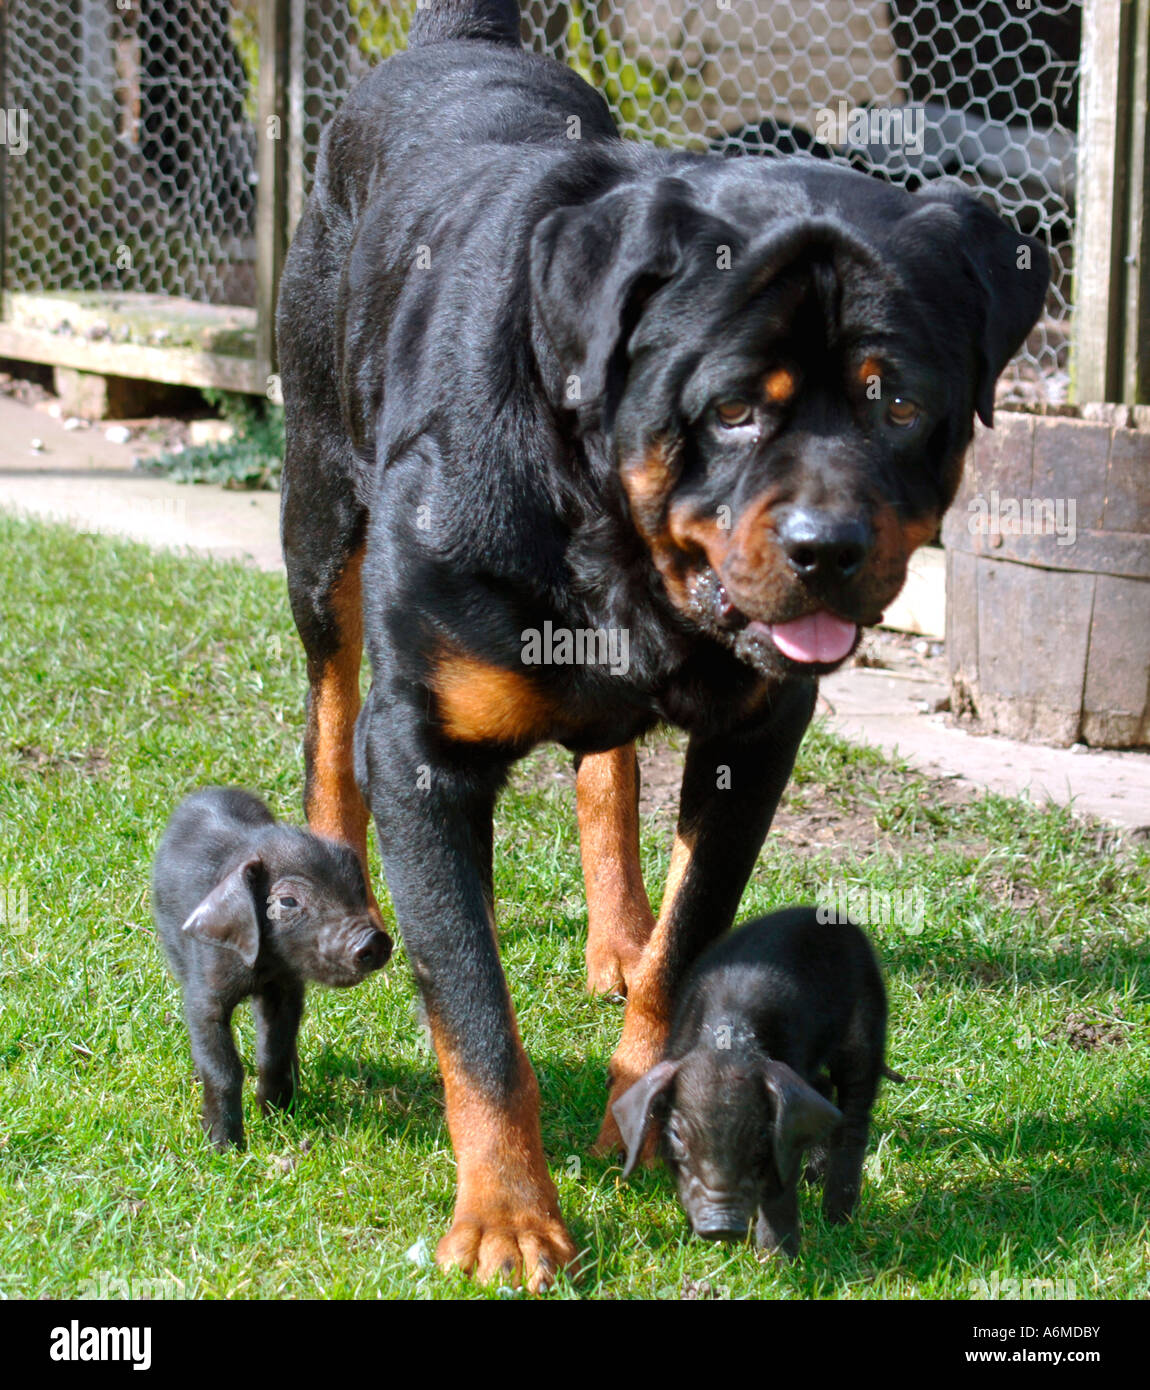 Oscar The Rothweiler Guarding His Two Adopted British Black Piglets. Stock Photo